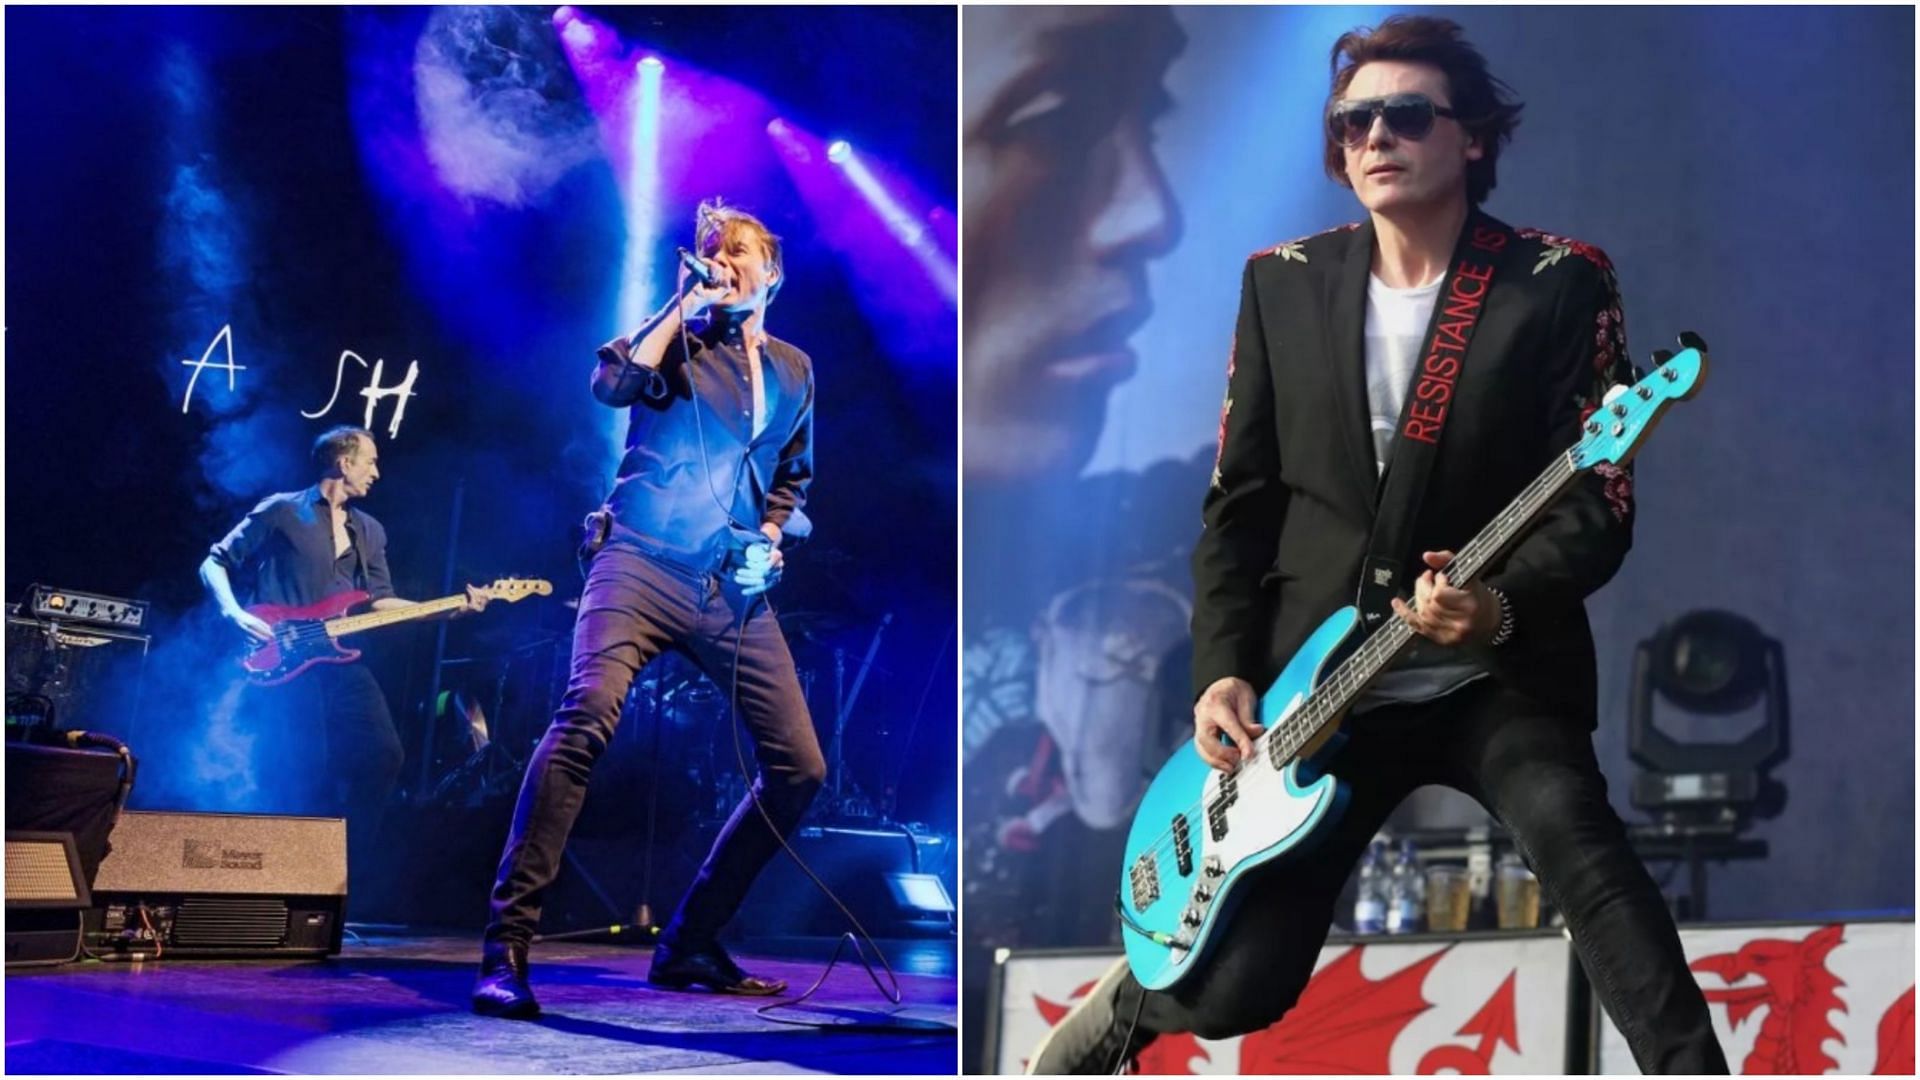 Suede and Manic Street Preachers have announced a co-headlining tour. (Image via Frank Hoensch / Redferns and Simone Joyner / Getty Images)